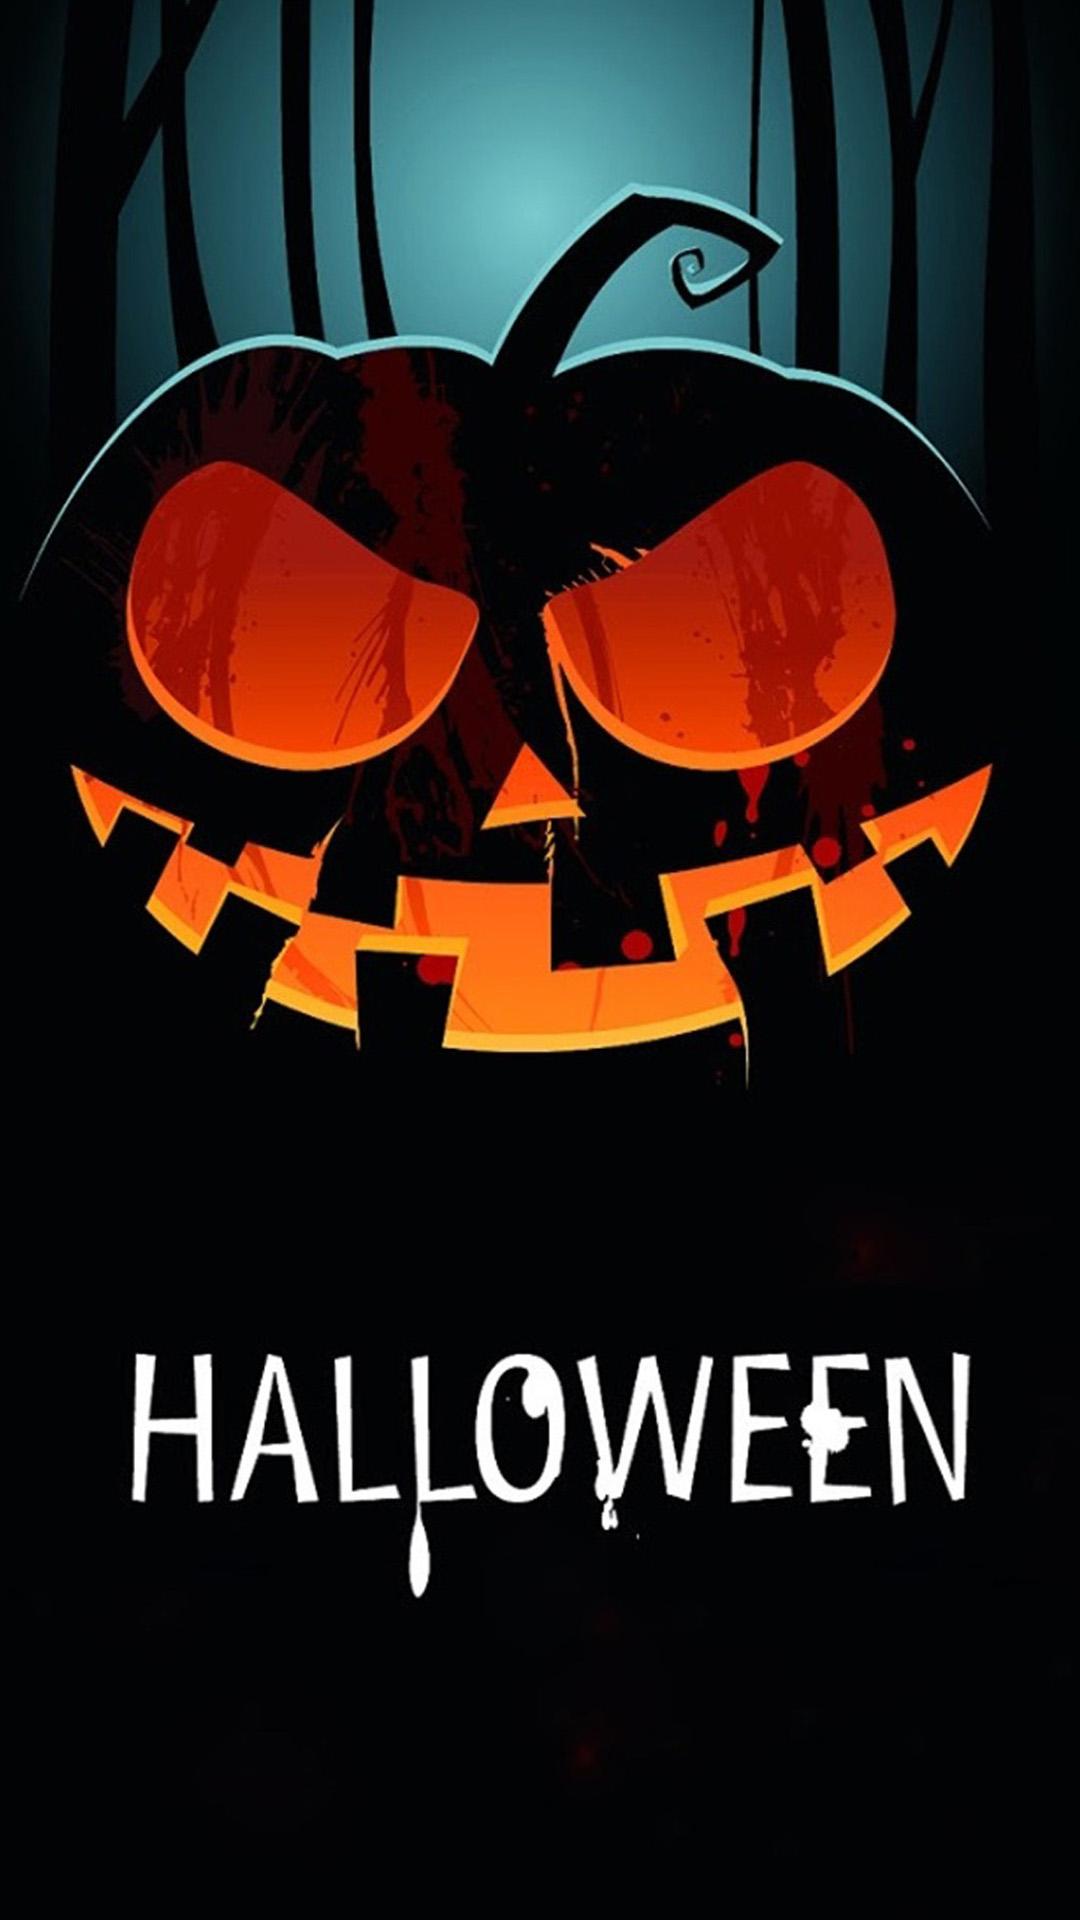 Halloween Pumpkin htc one wallpaper, free and easy